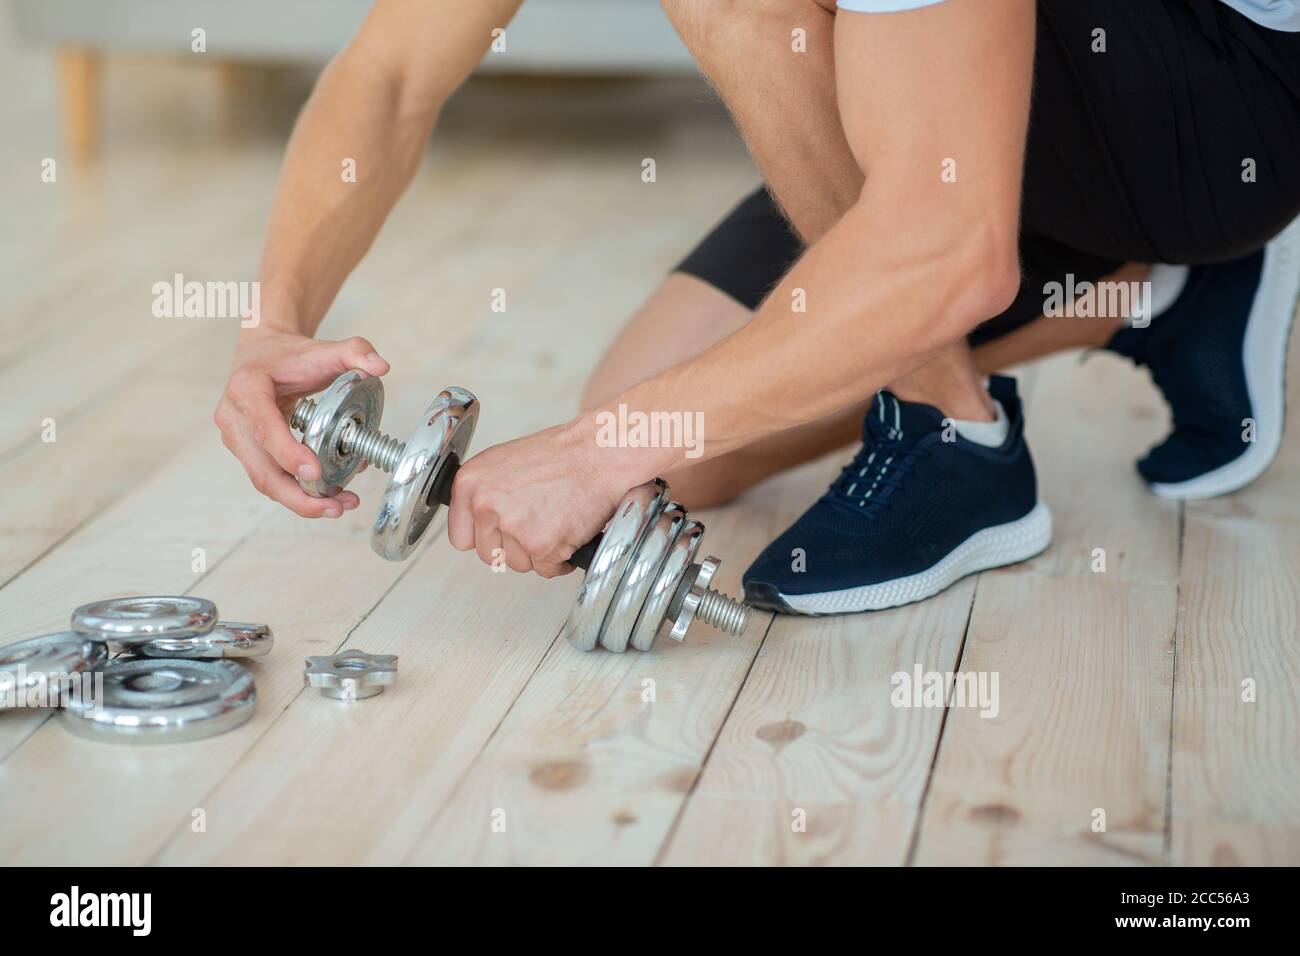 Strength training at home. Man puts discs on dumbbells for workout Stock Photo